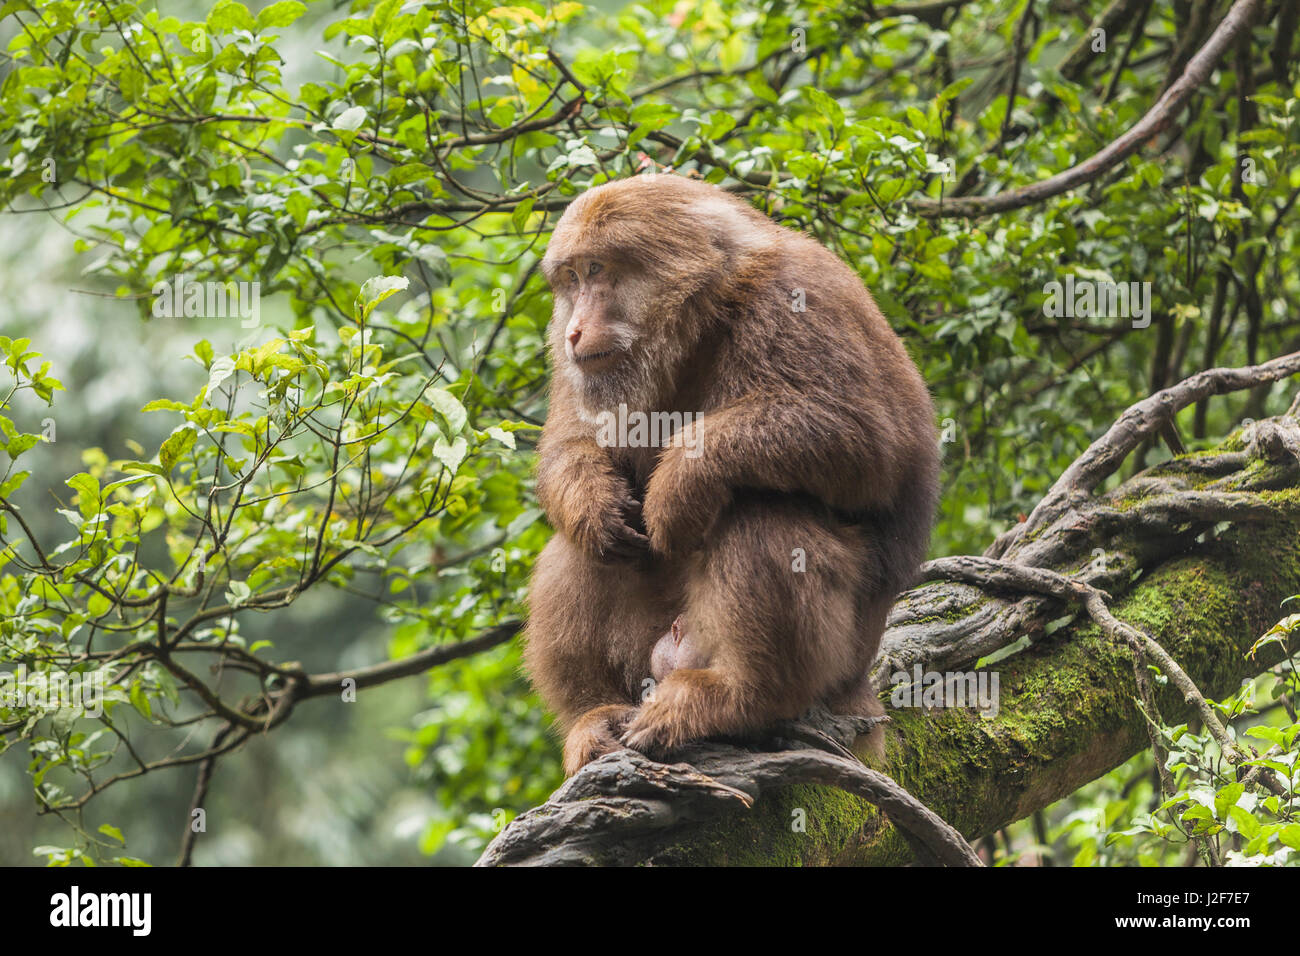 Male Tibetan Macaque sitting in a tree Stock Photo